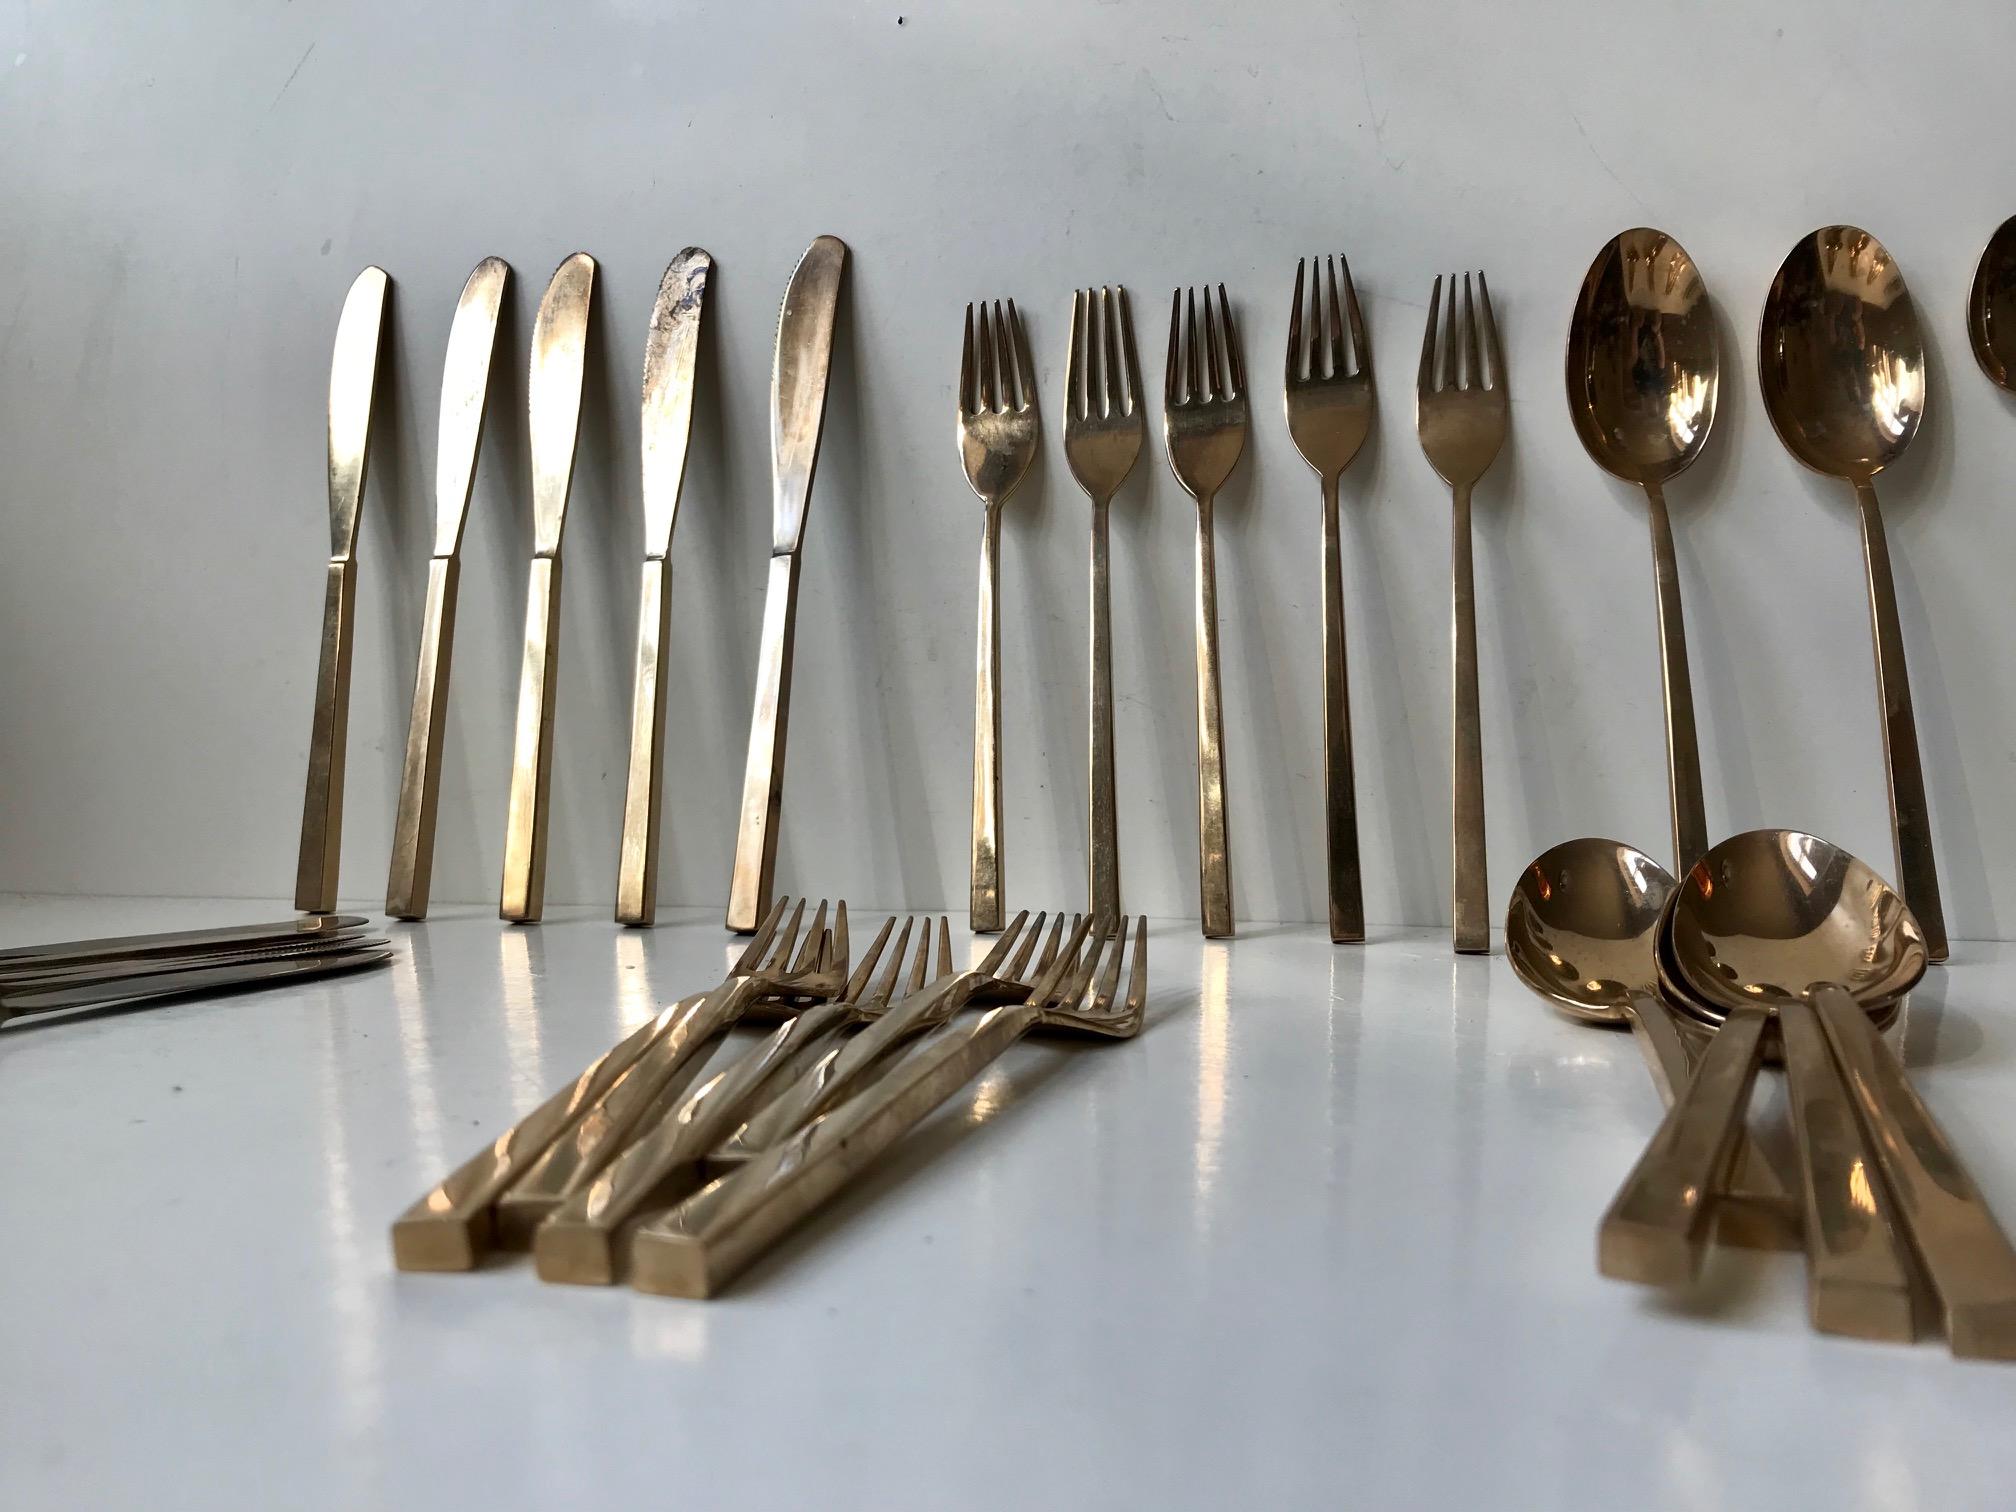 - Bronze cutlery set
- Designed by the Swedish prince Sigvard Bernadotte
- Manufactured by Scanline in Denmark during the late 1950s
- The set consists 10 dinner or lunch knives, 10 forks, 6 soup spoons
and 6 dessert or cocktail spoons
- All